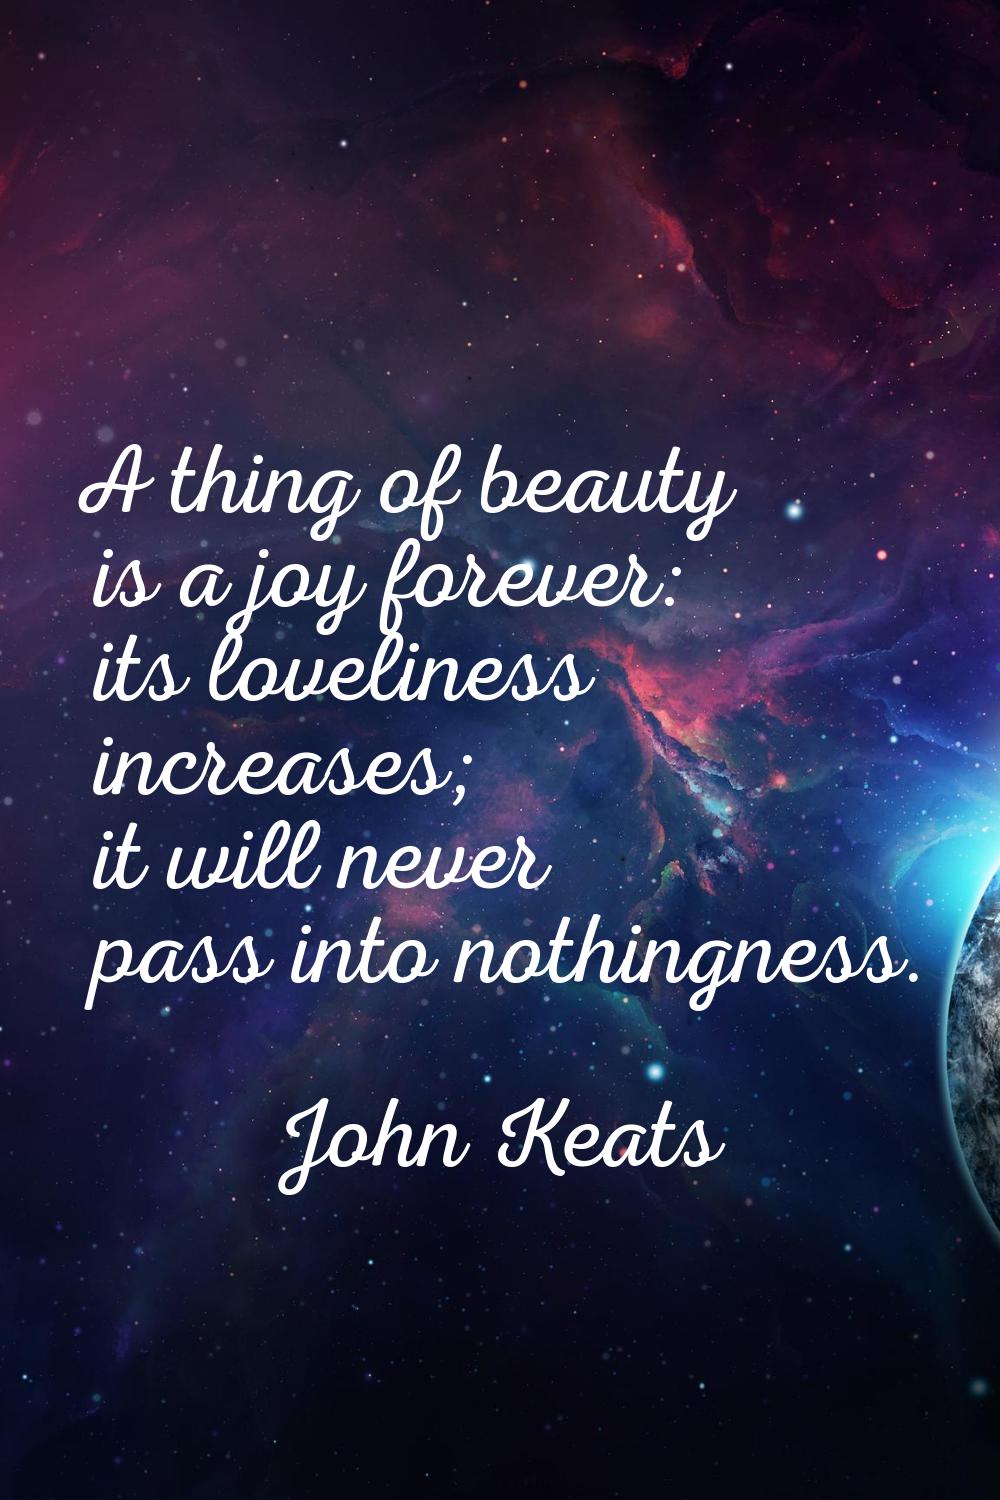 A thing of beauty is a joy forever: its loveliness increases; it will never pass into nothingness.